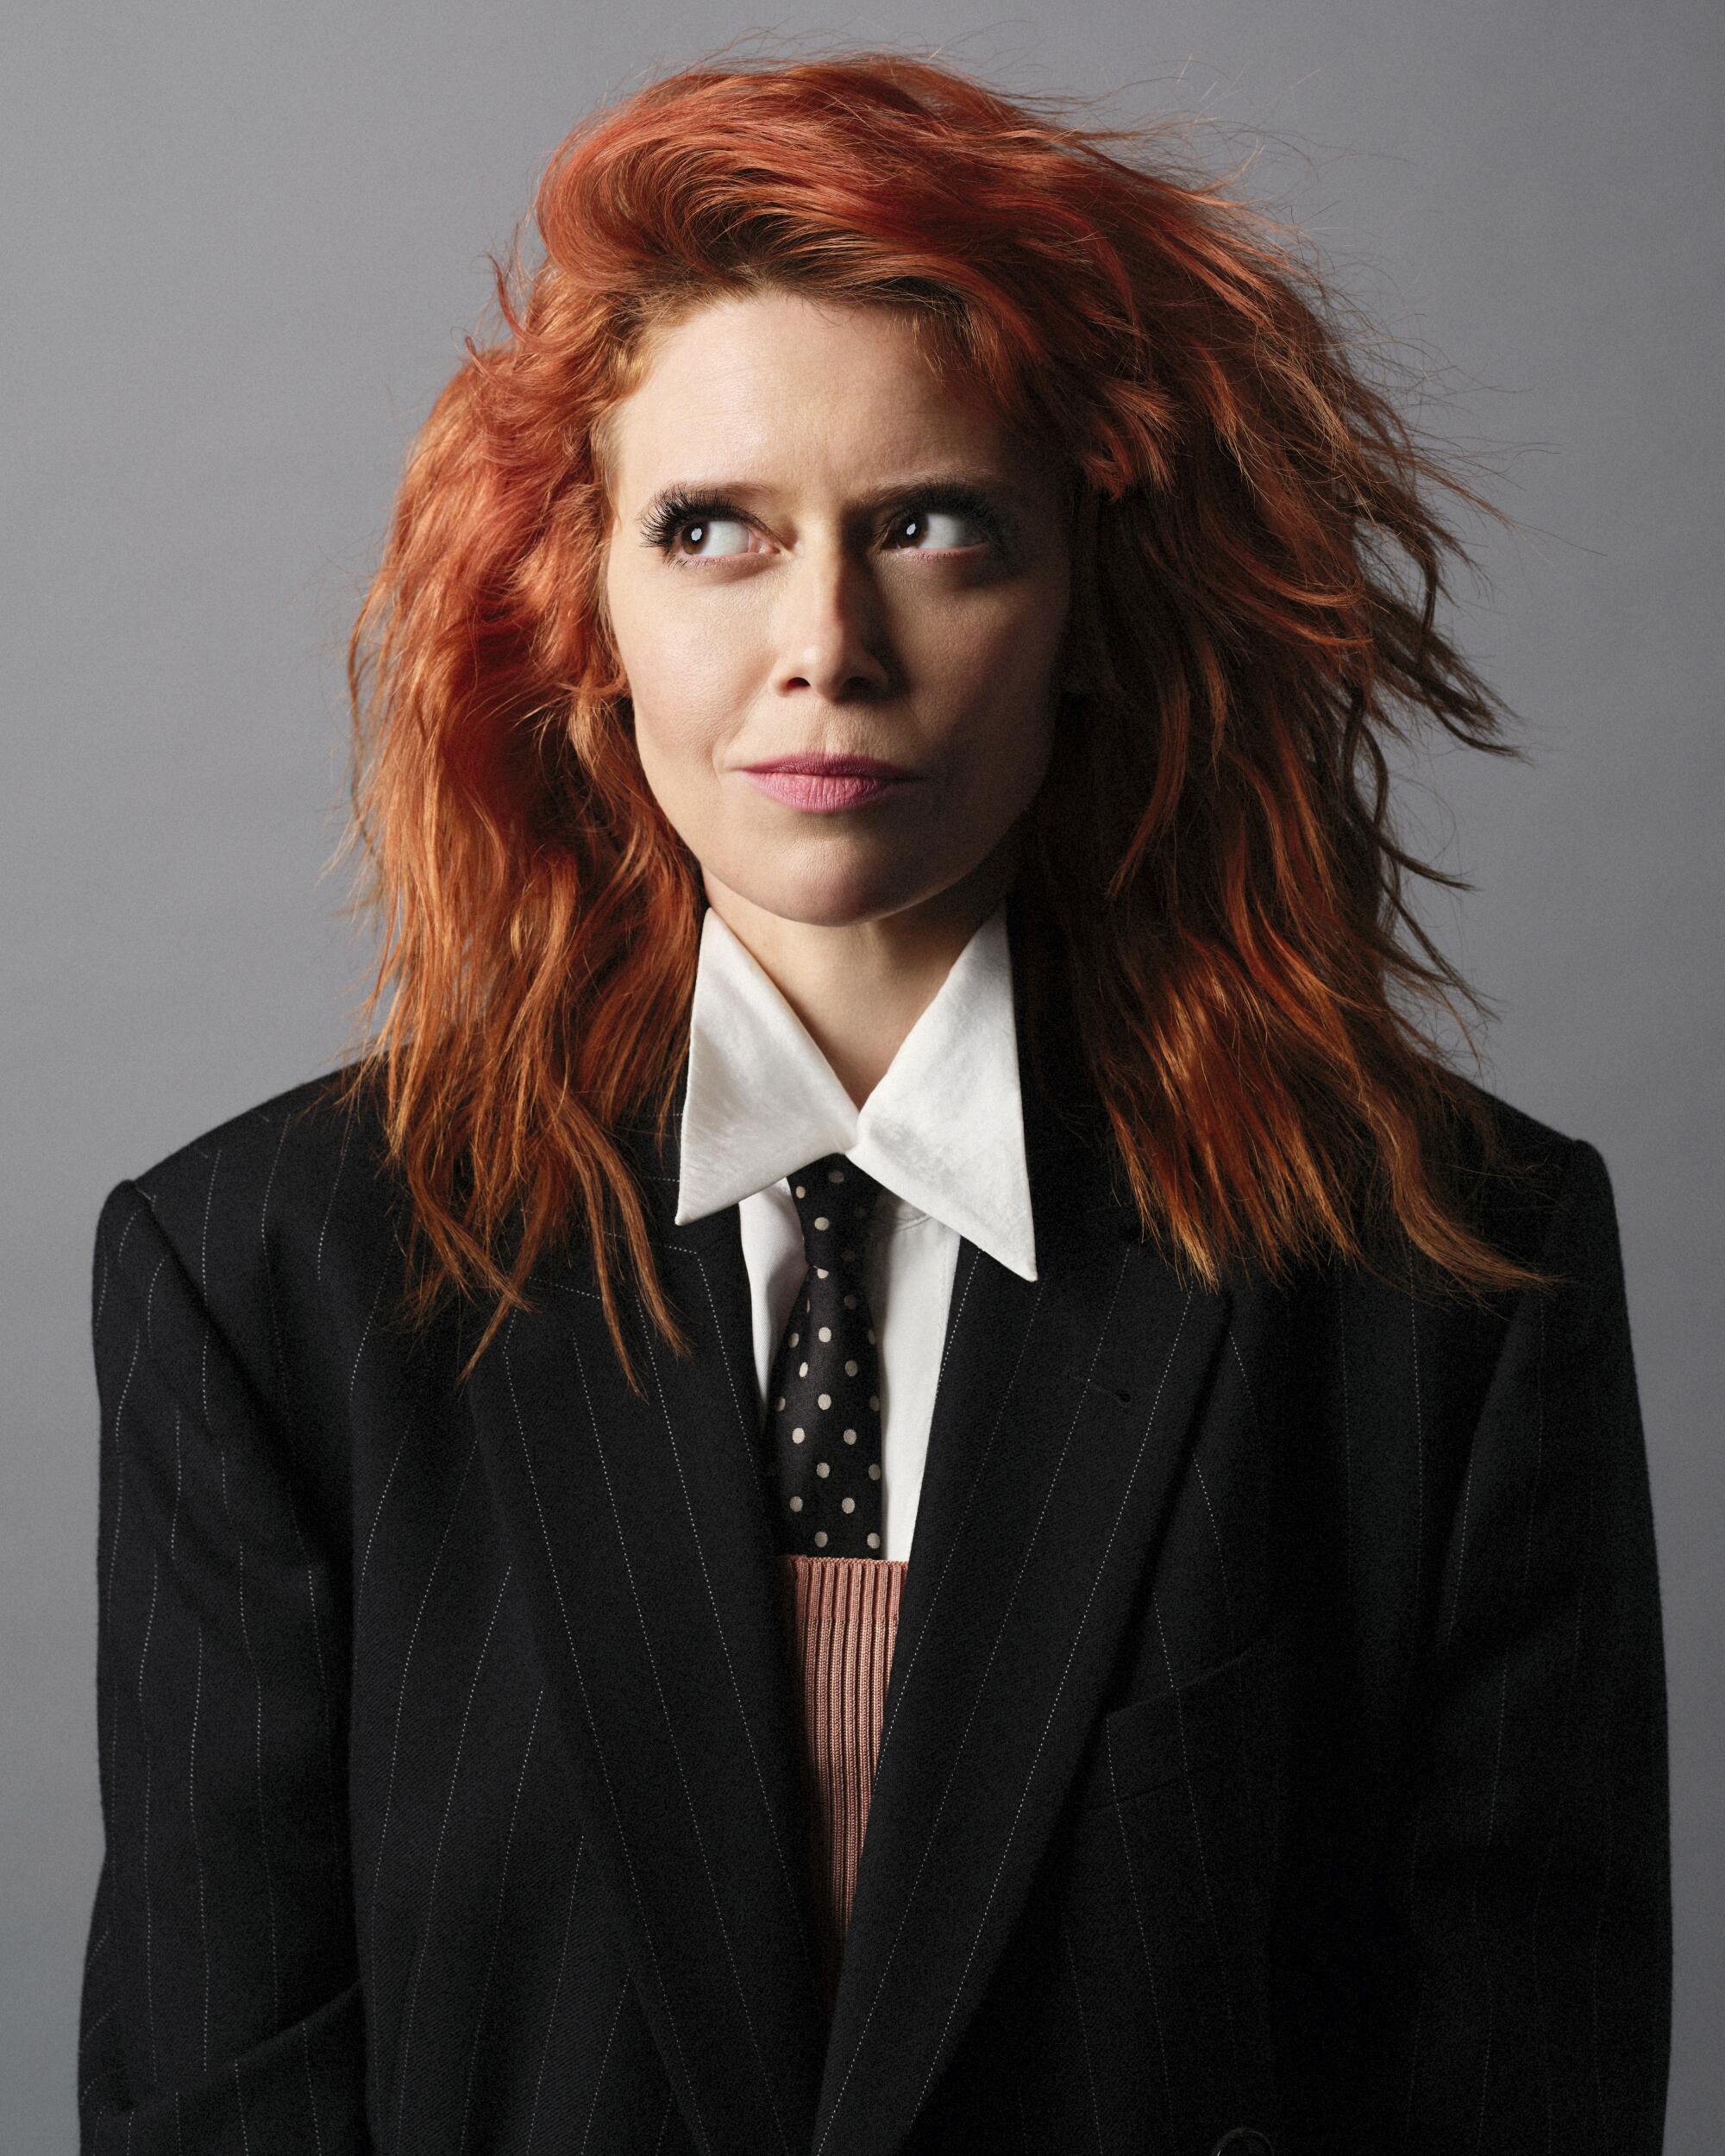 Review: Natasha Lyonne has found the role of her career in 'Poker